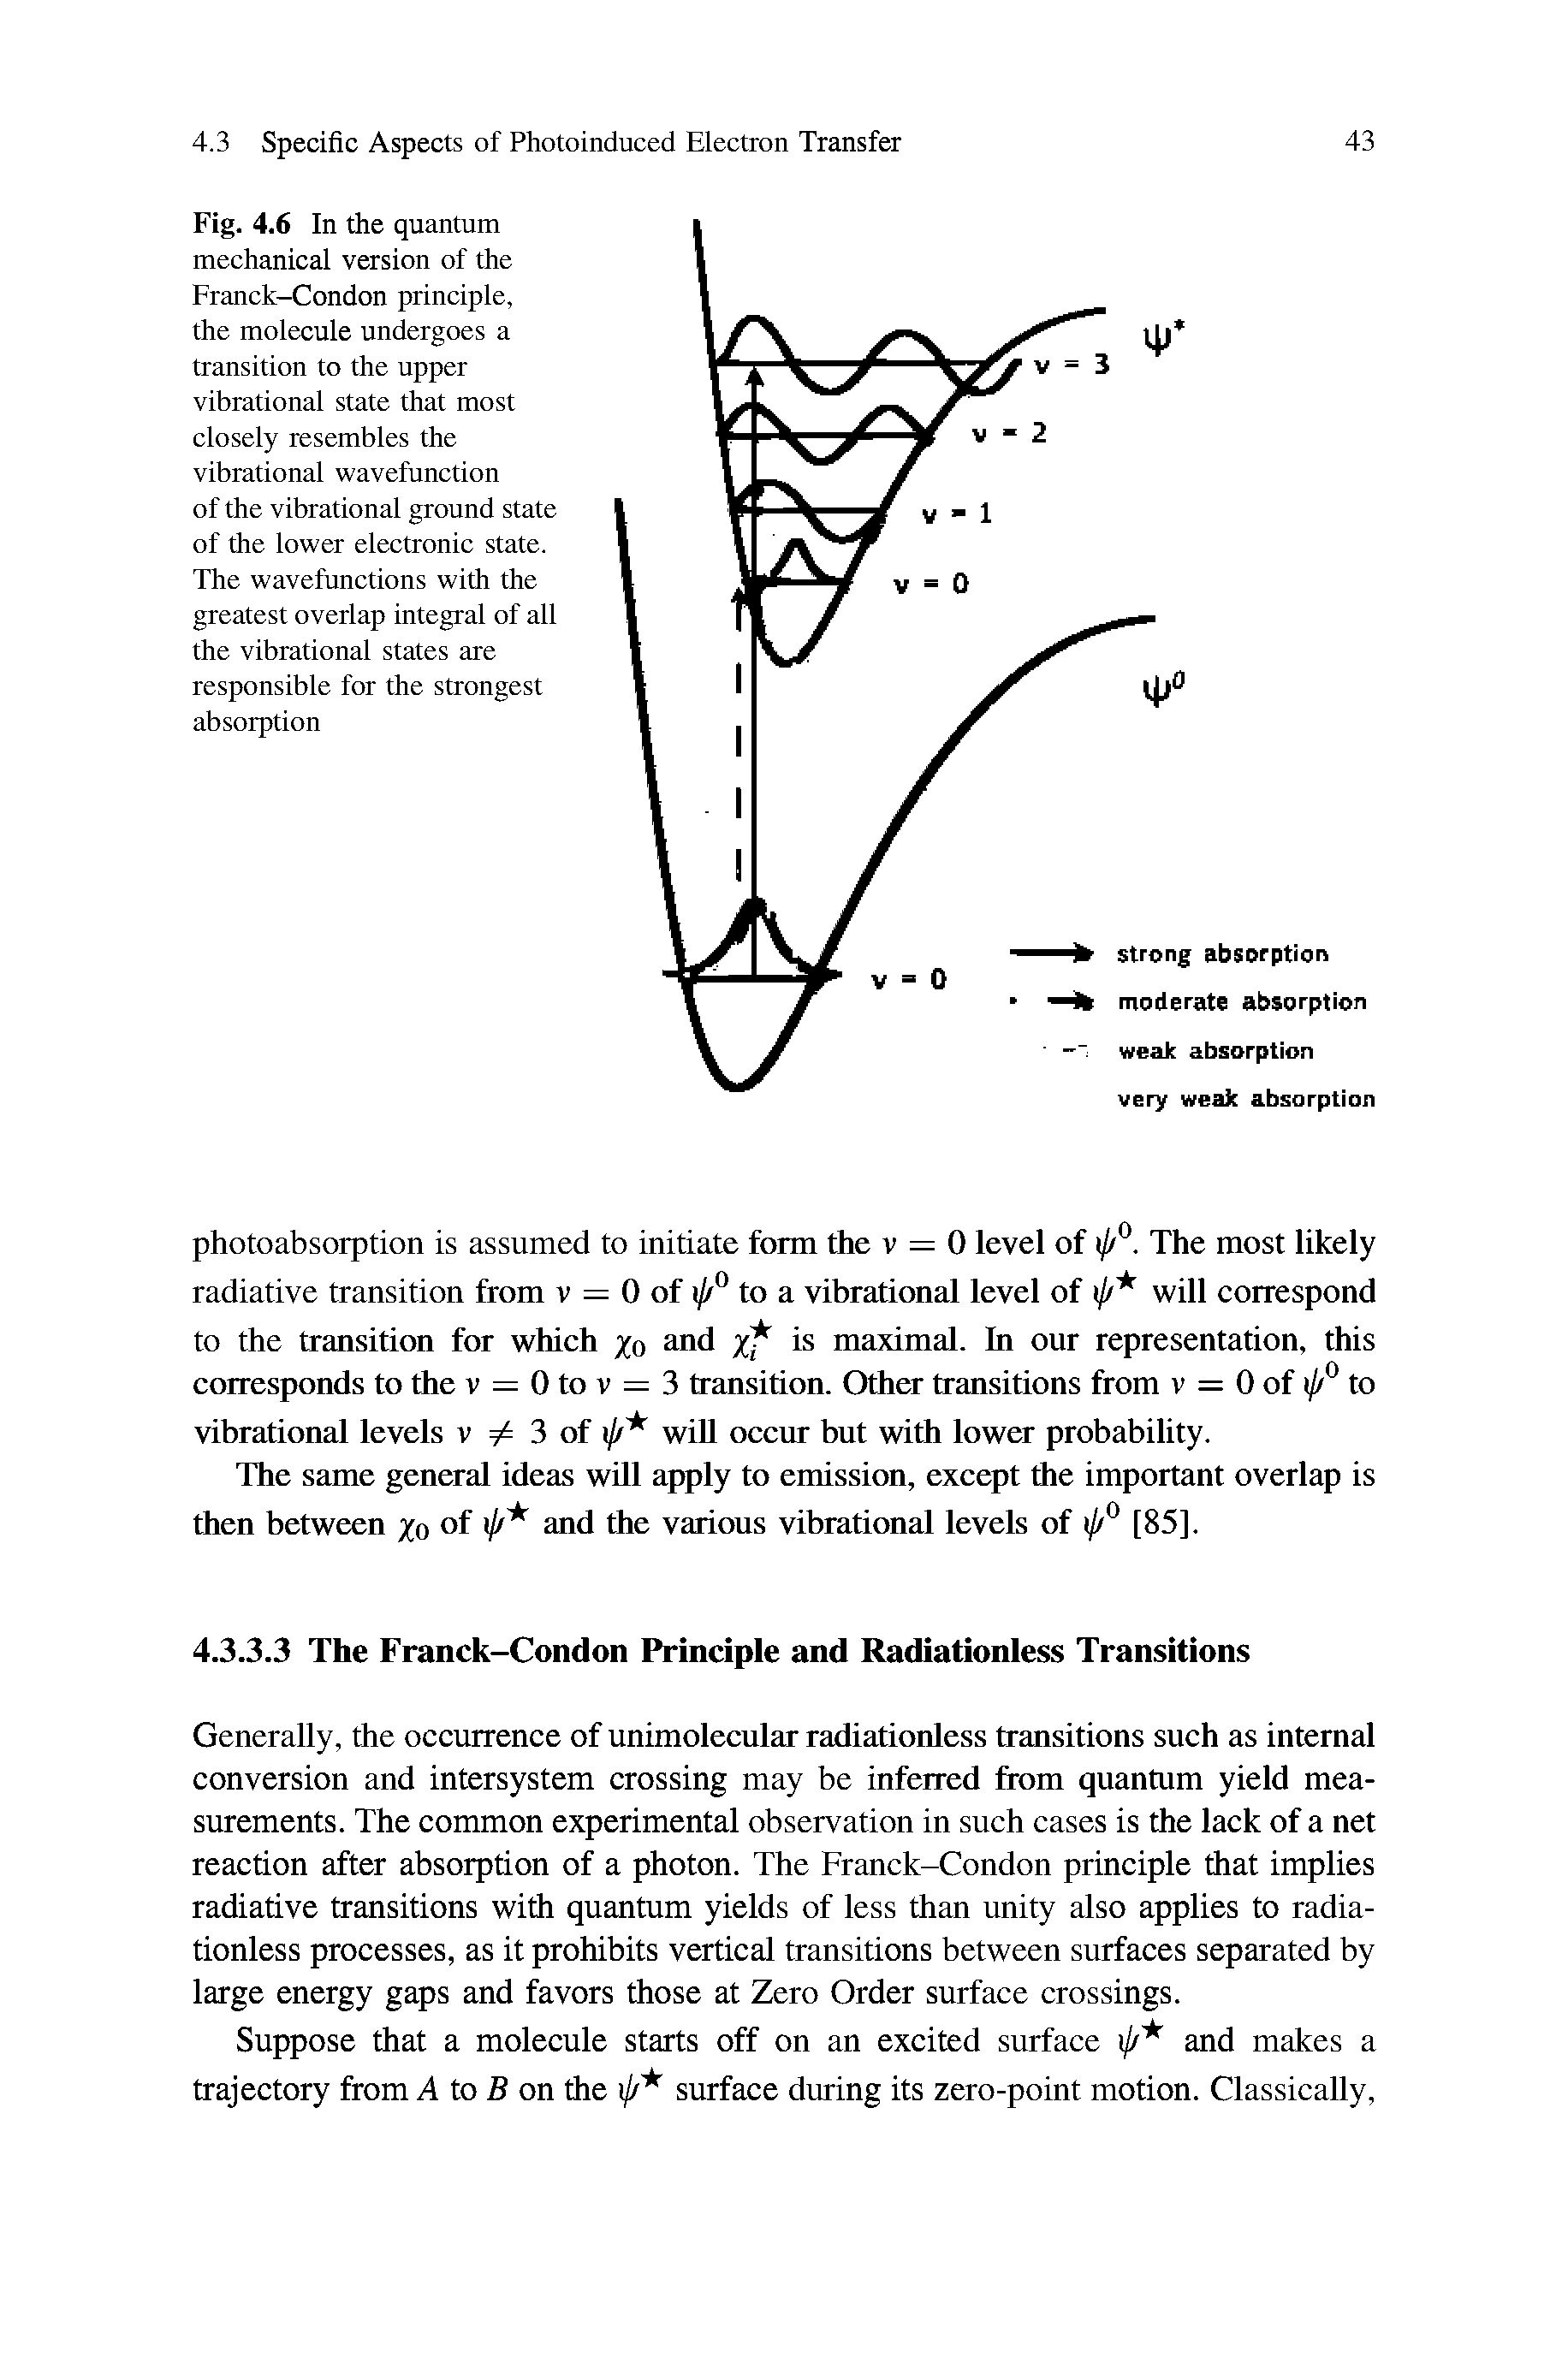 Fig. 4.6 In the quantum mechanical version of the Franck-Condon principle, the molecule undergoes a transition to the upper vibrational state that most closely resembles the vibrational wavefunction of the vibrational ground state of the lower electronic state. The wavefunctions with the greatest overlap integral of all the vibrational states are responsible for the strongest absorption...